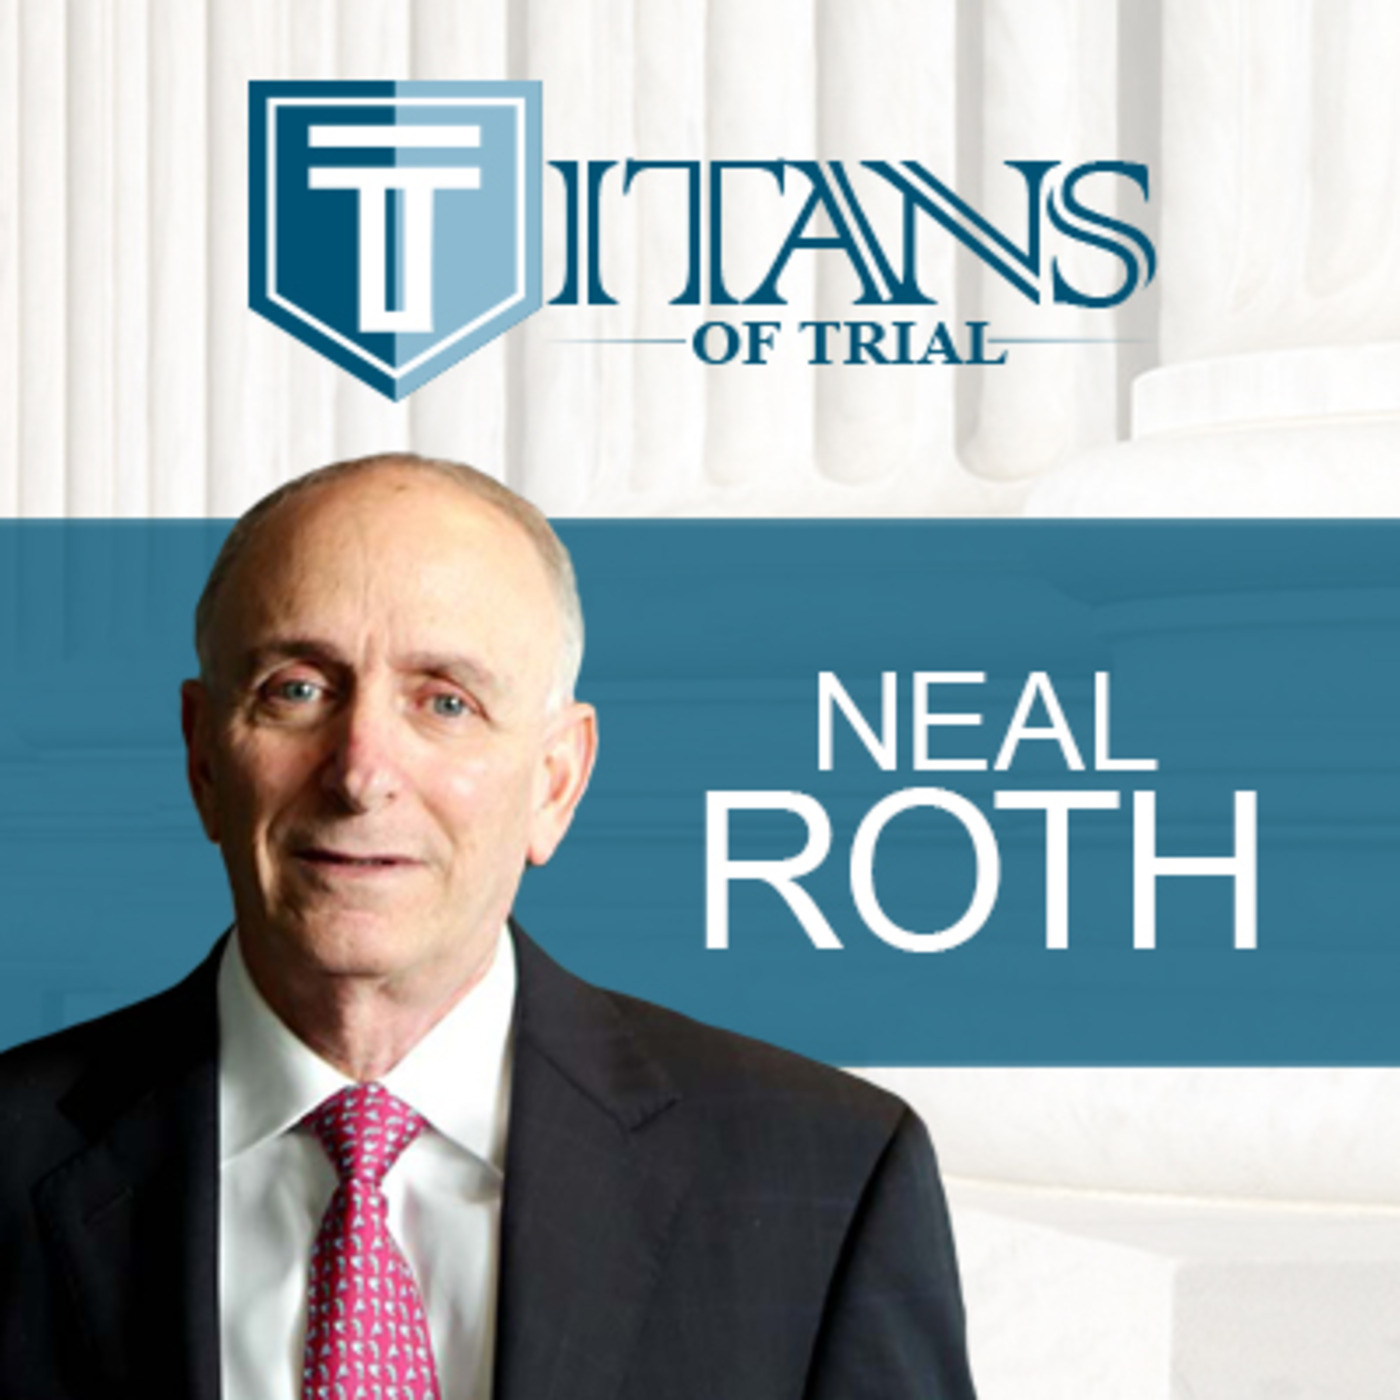 Titans of Trial - Neal Roth